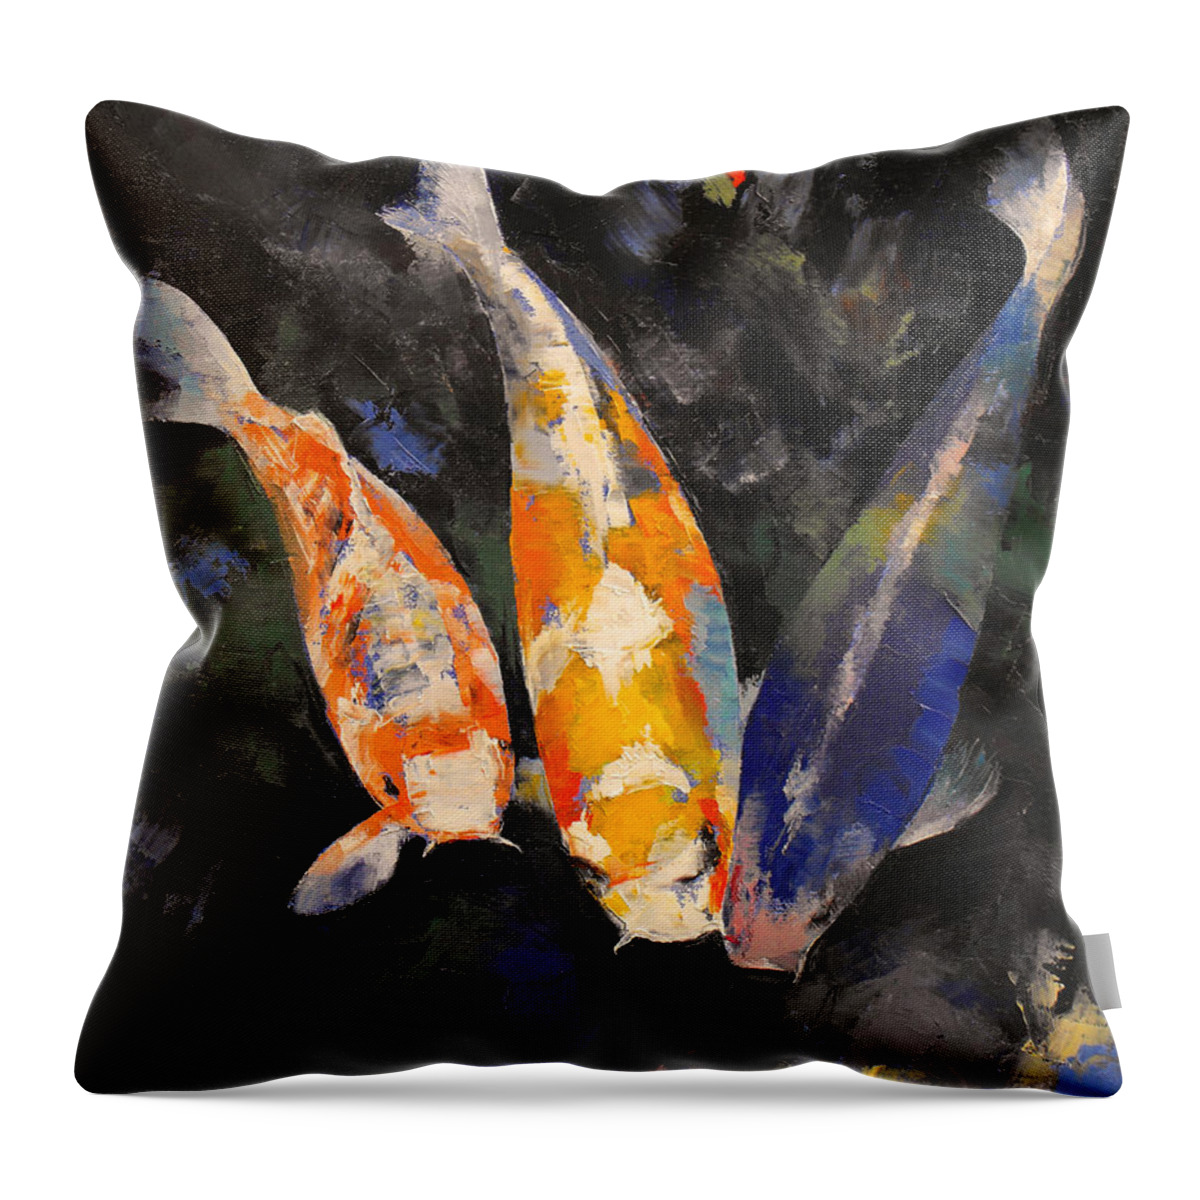 Abstract Throw Pillow featuring the painting Three Koi Fish by Michael Creese